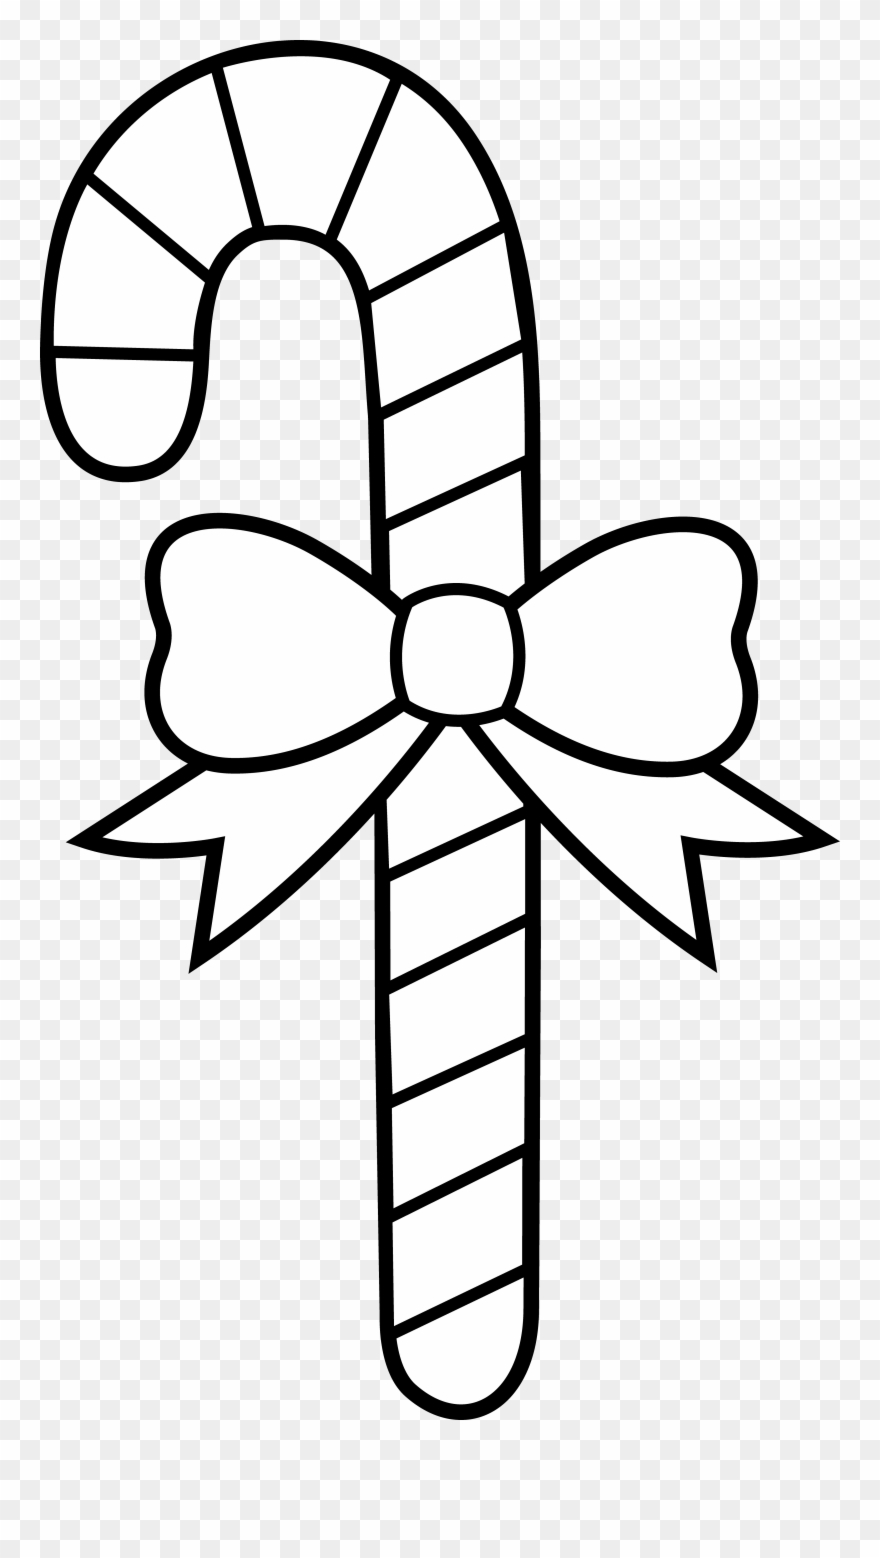 Candy Cane Coloring Pages Christmas Candy Cane Coloring